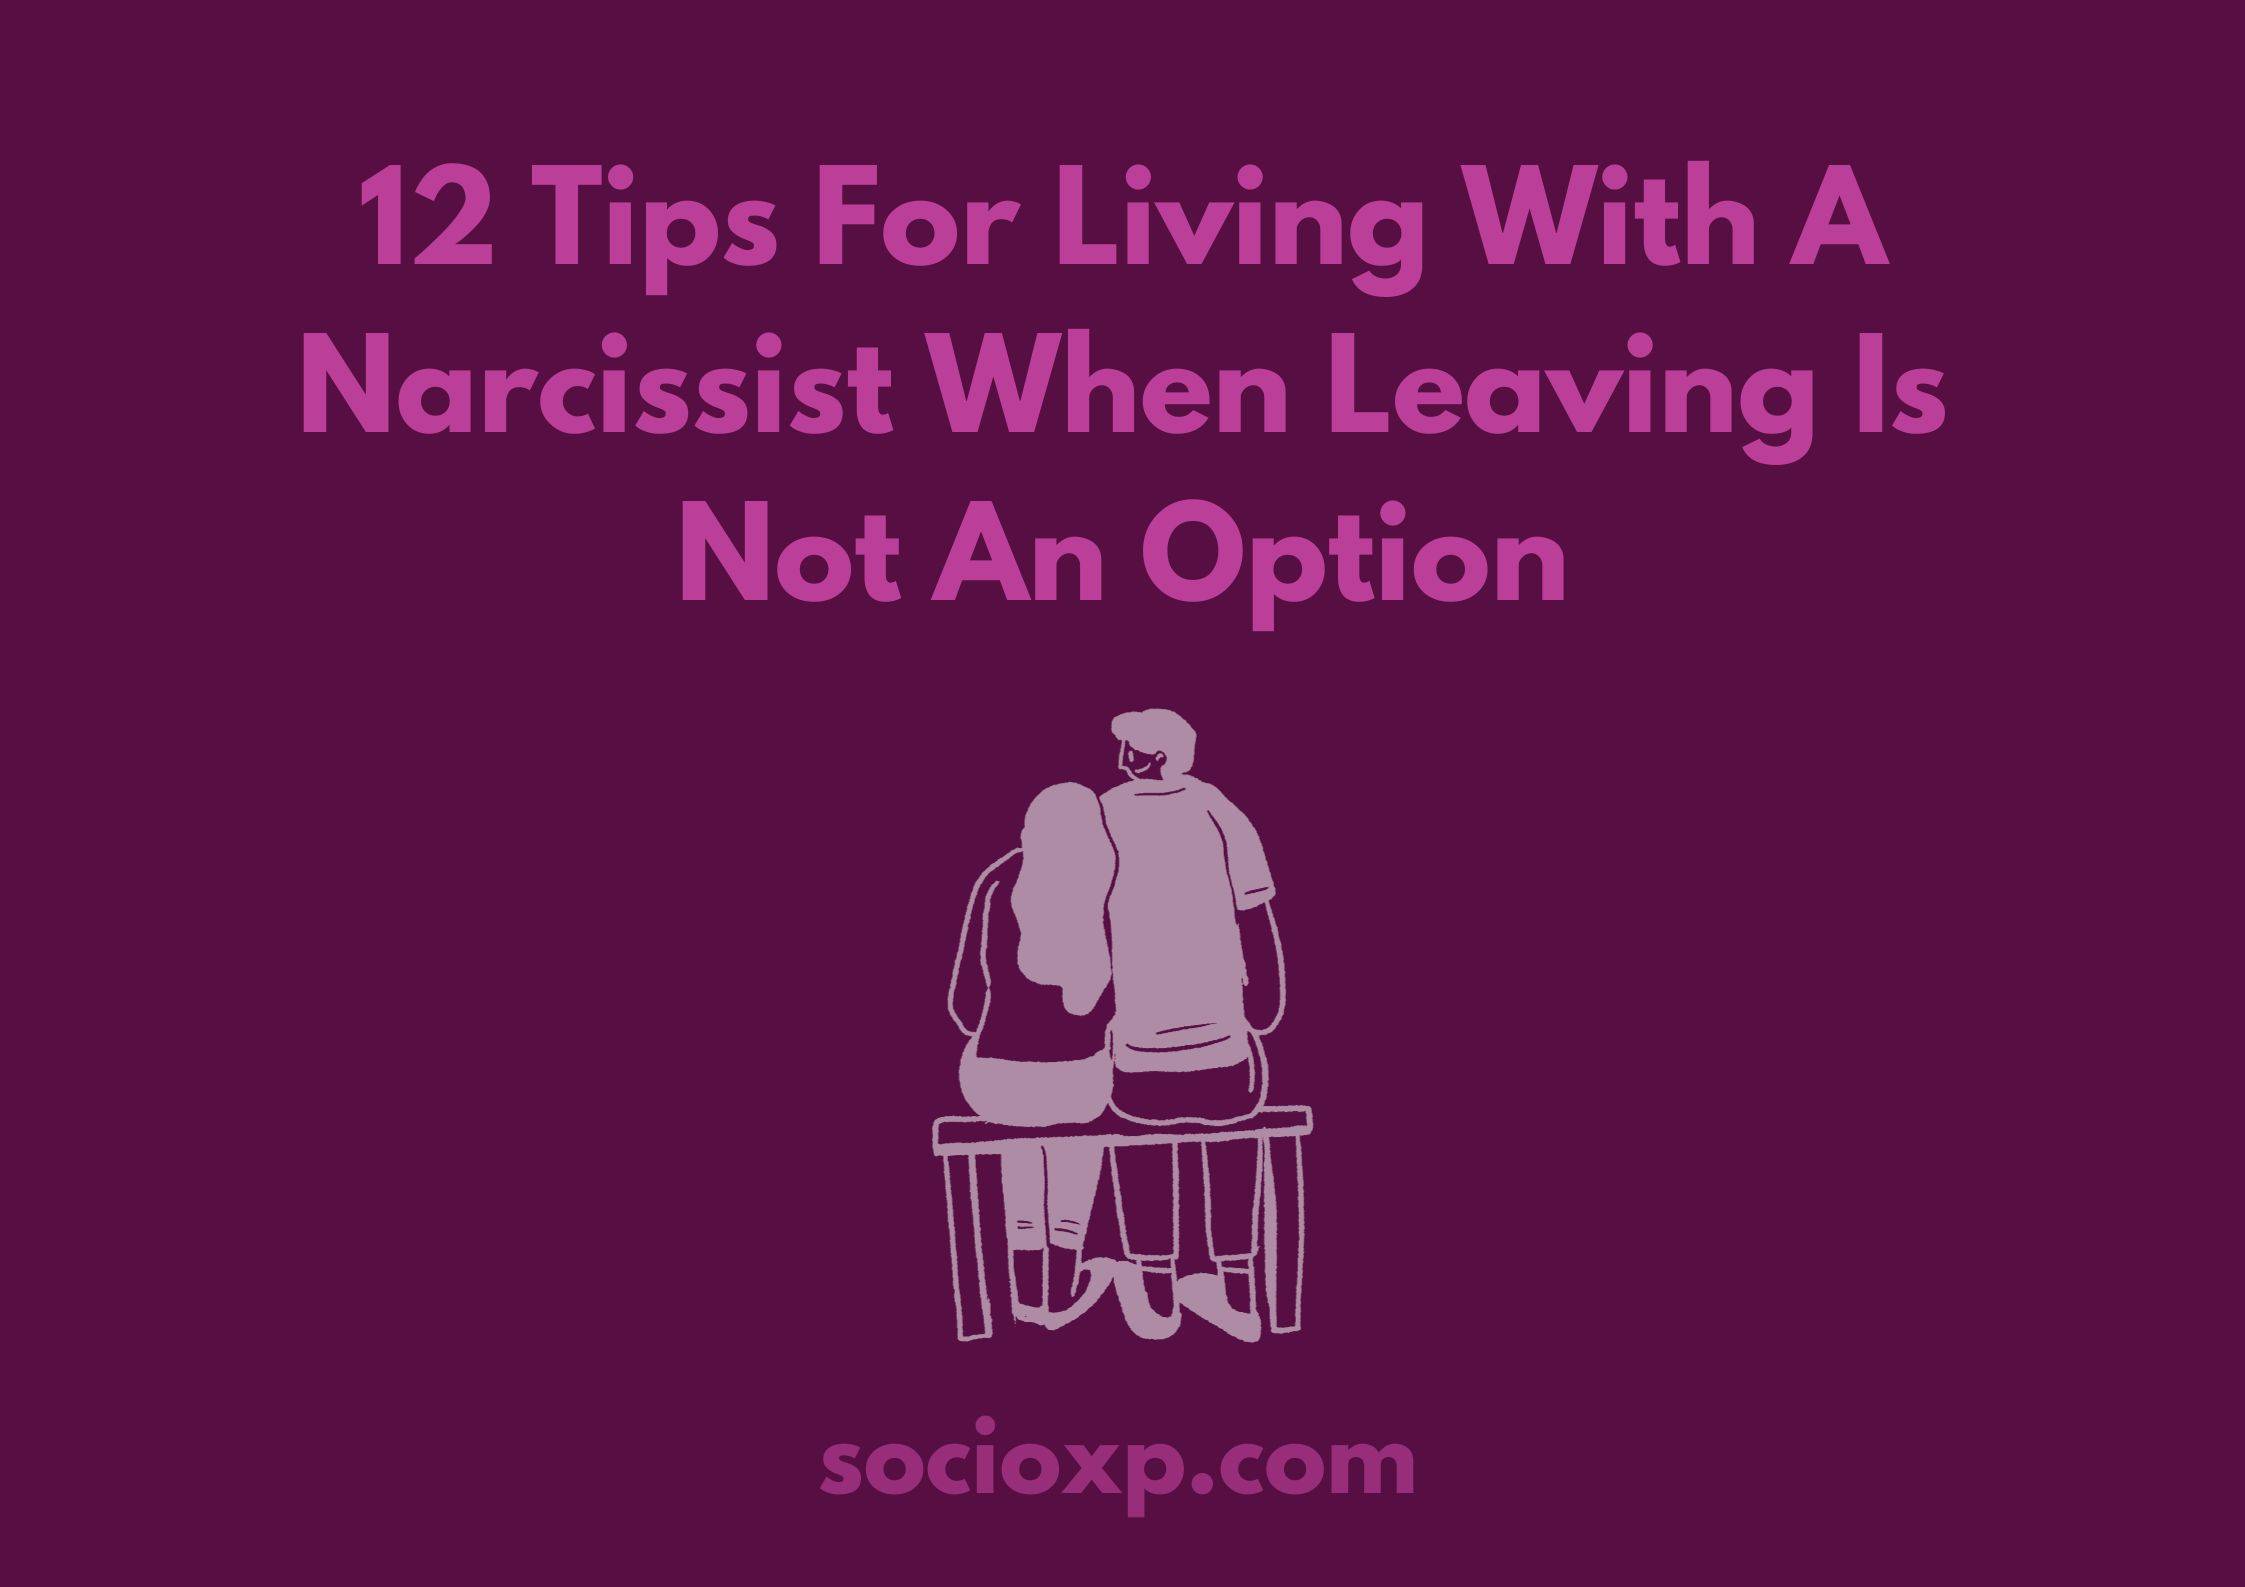 12 Tips For Living With A Narcissist When Leaving Is Not An Option